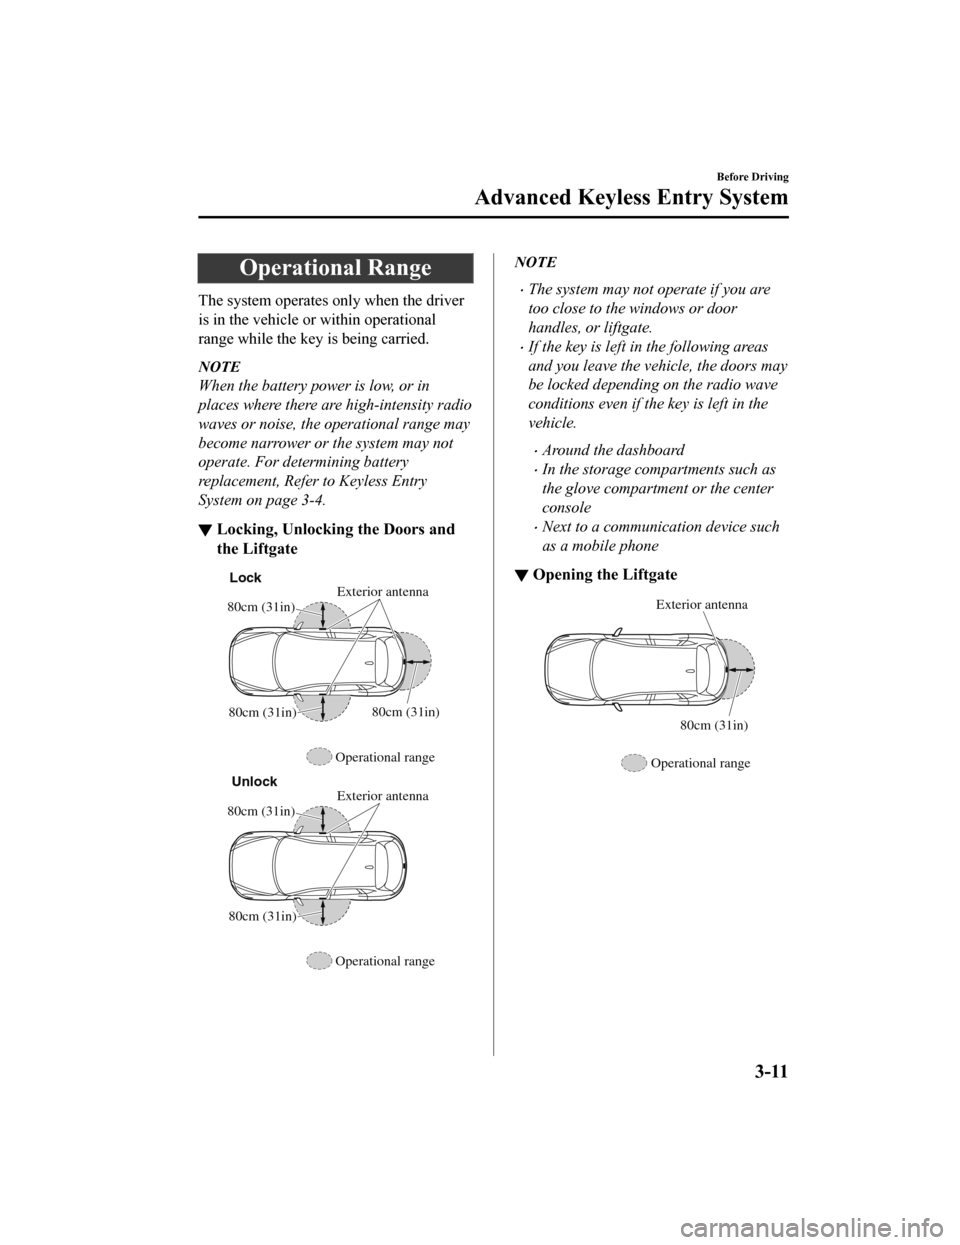 MAZDA MODEL CX-5 2020  Owners Manual (in English) Operational Range
The system operates only when the driver
is in the vehicle or within operational
range while the key is being carried.
NOTE
When the battery power is low, or in
places where there ar